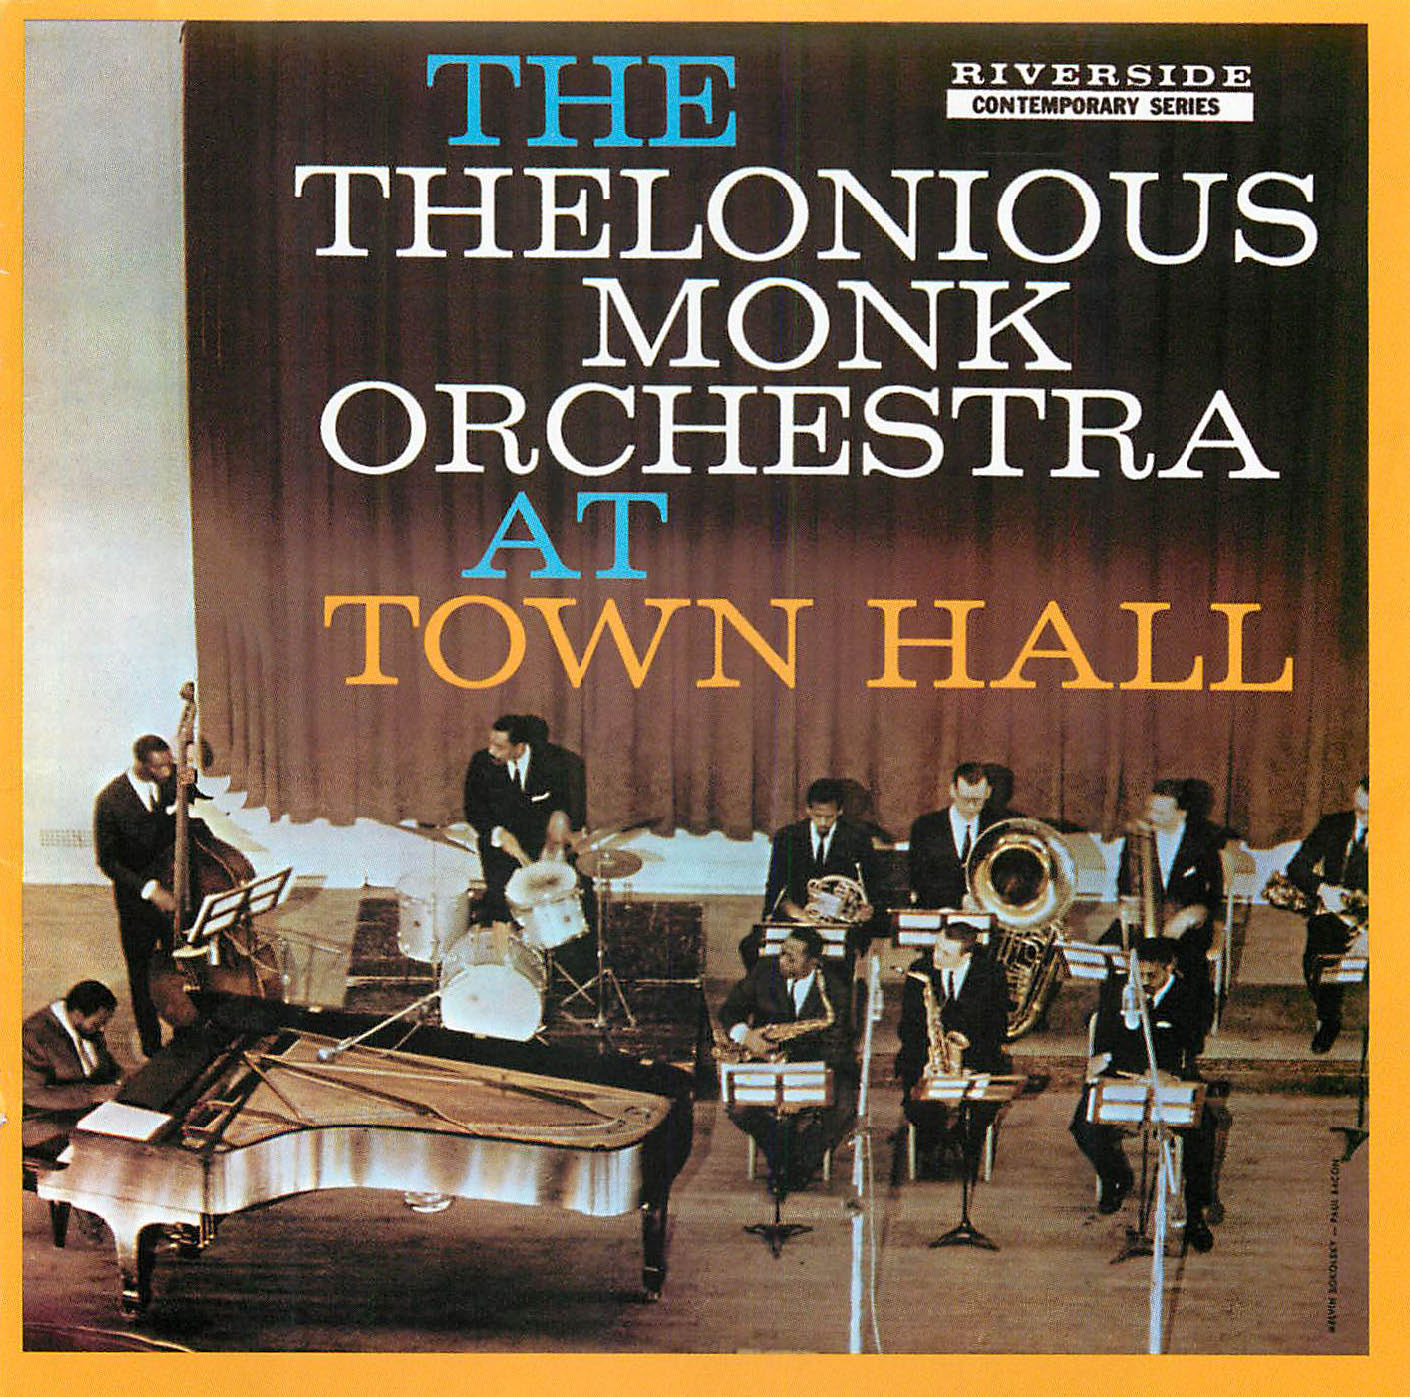 thelonious monk at town hall